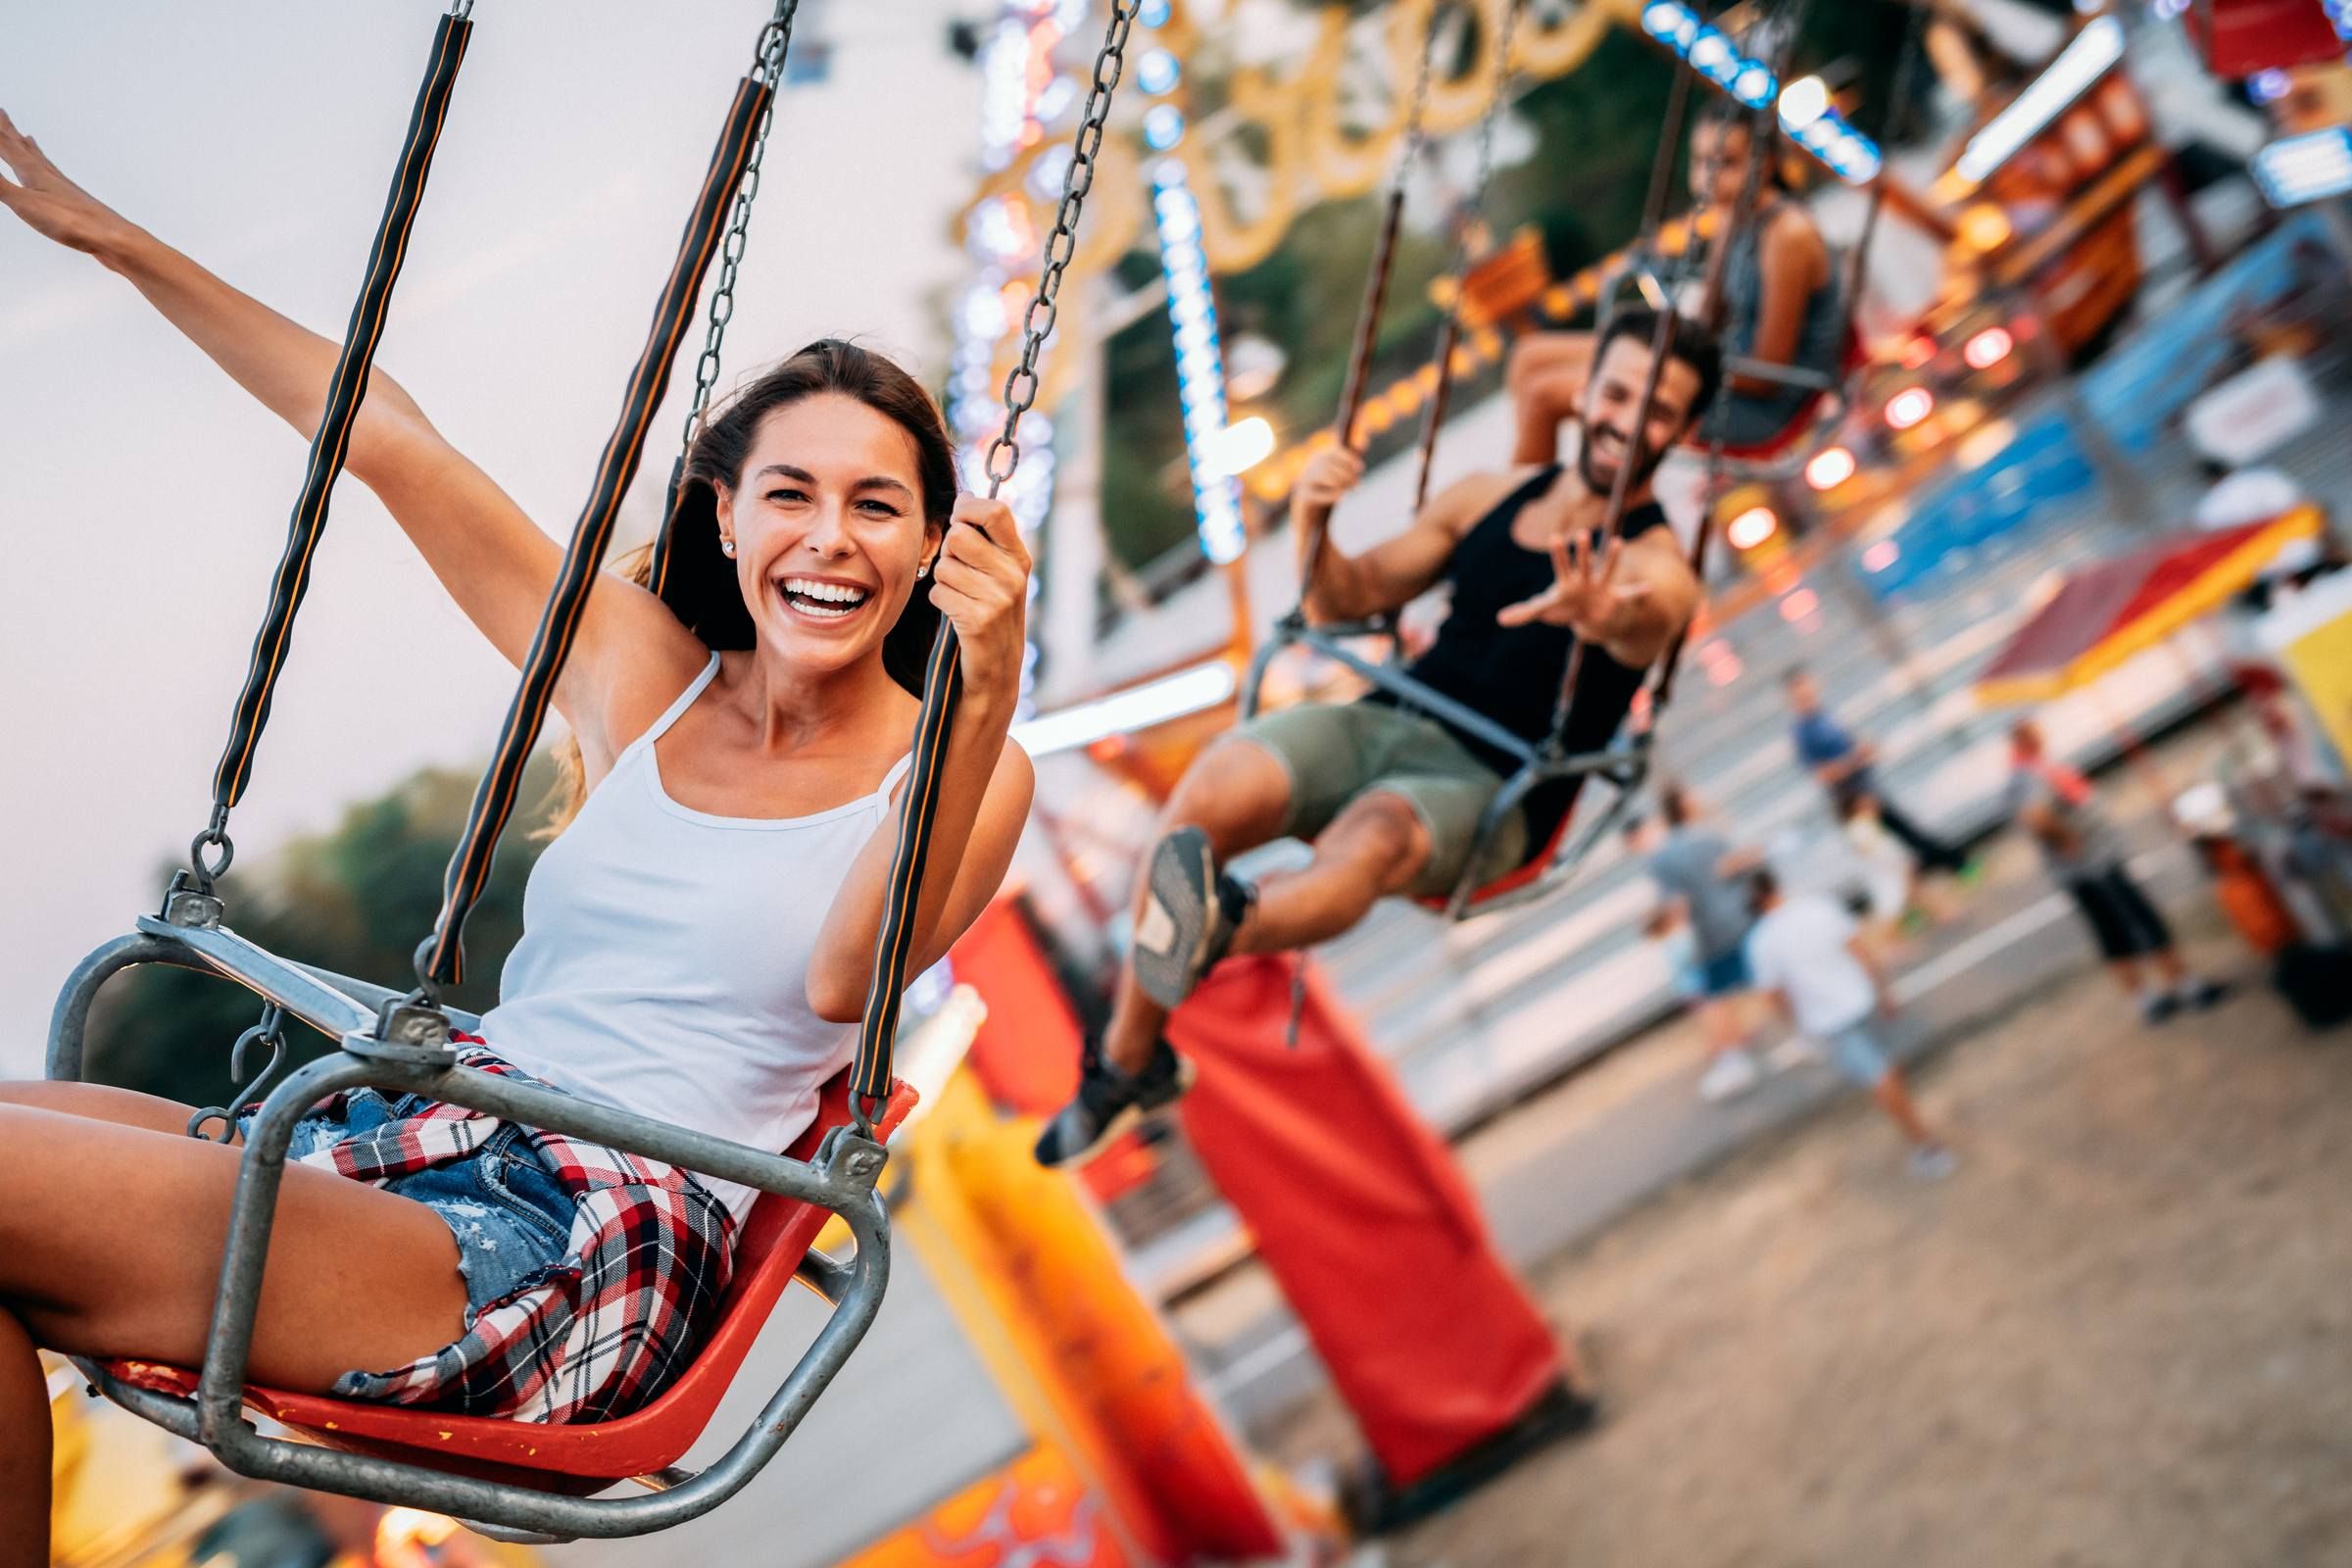 Young woman at a theme park on a swinging ride